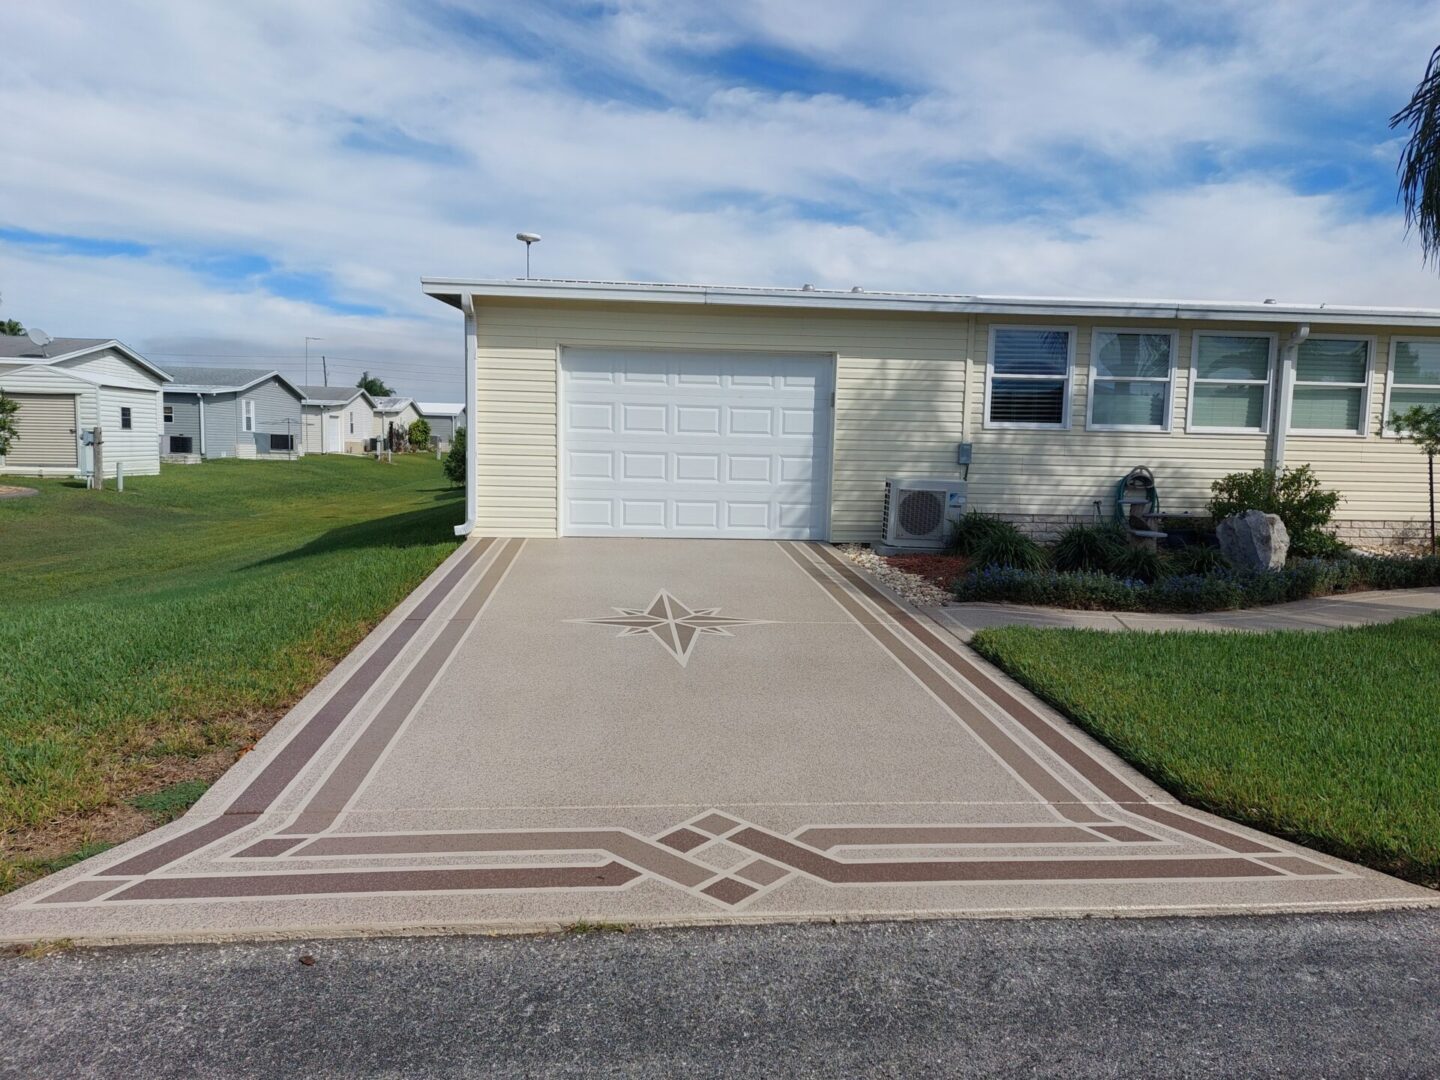 stardust driveway with star double border